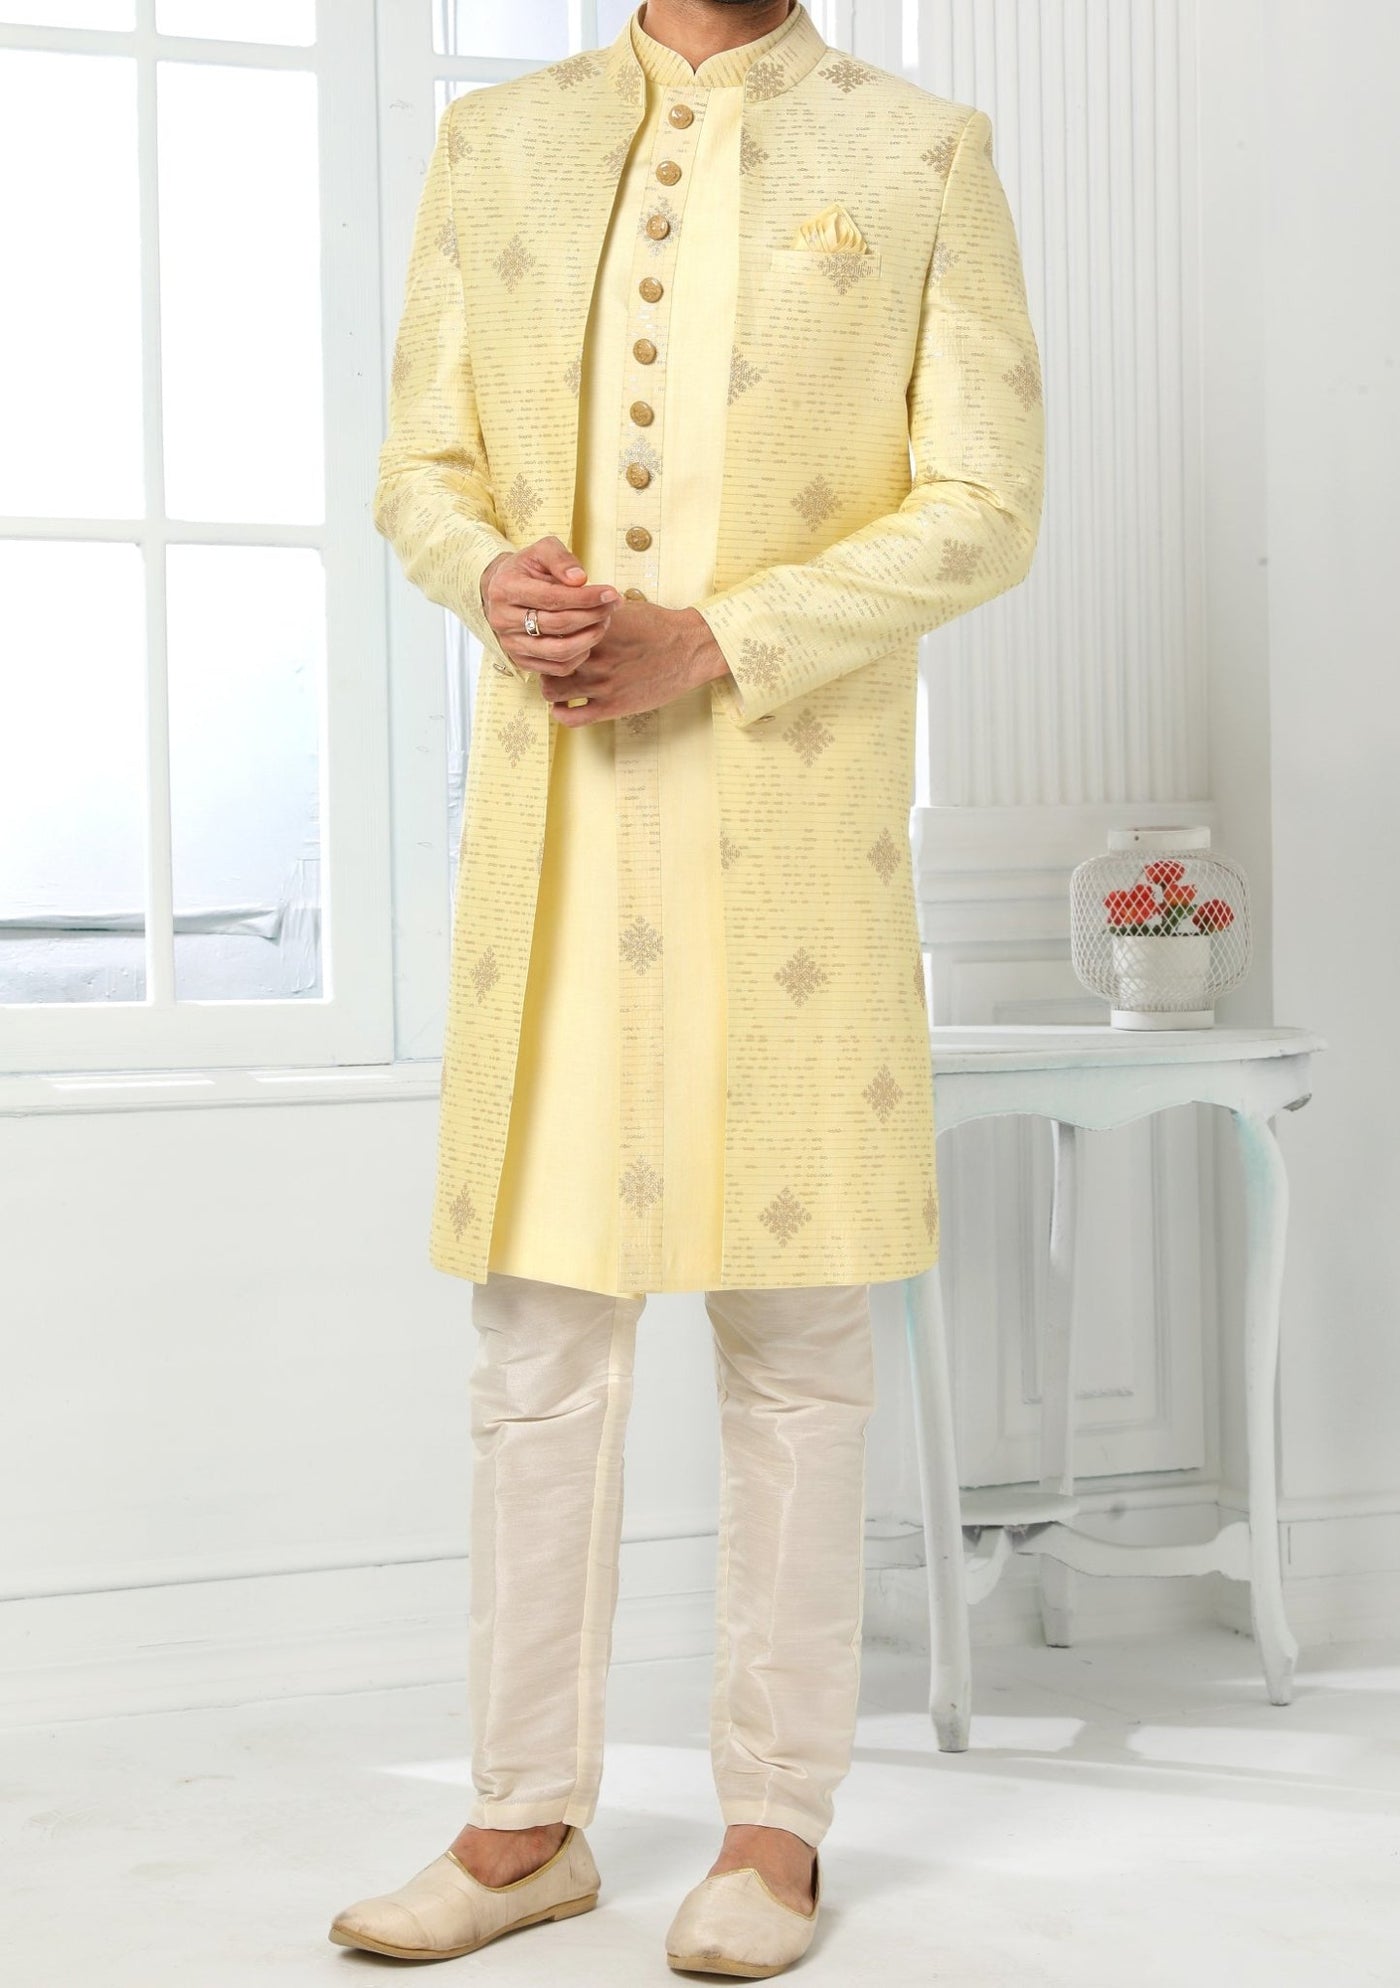 Men's Indo Western Party Wear Sherwani Suit With Jacket - db20437